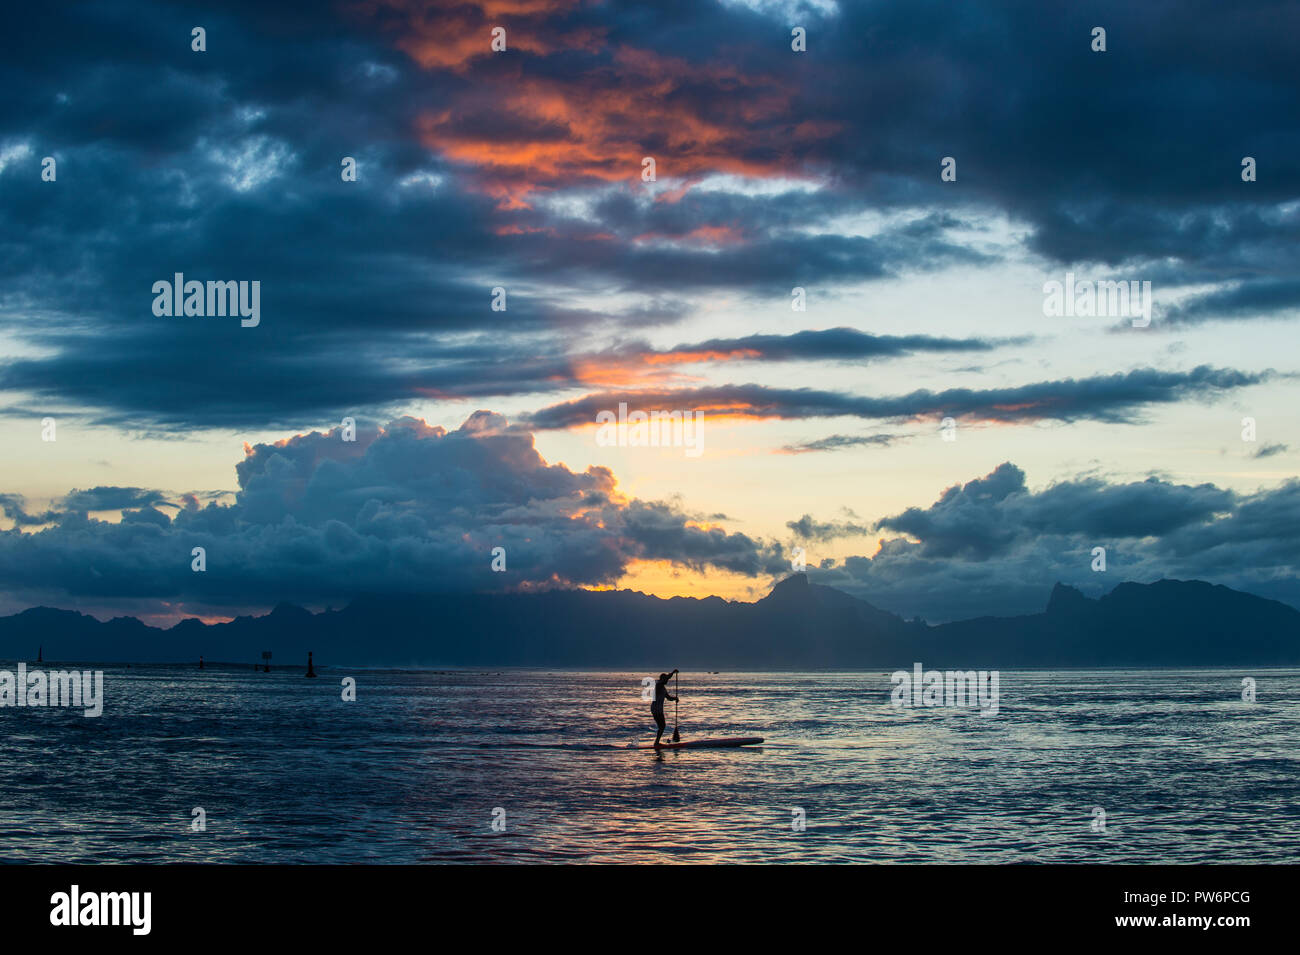 Silhouette of a stand up paddler, dramatic sunset over Moorea, Papeete, Tahiti Stock Photo